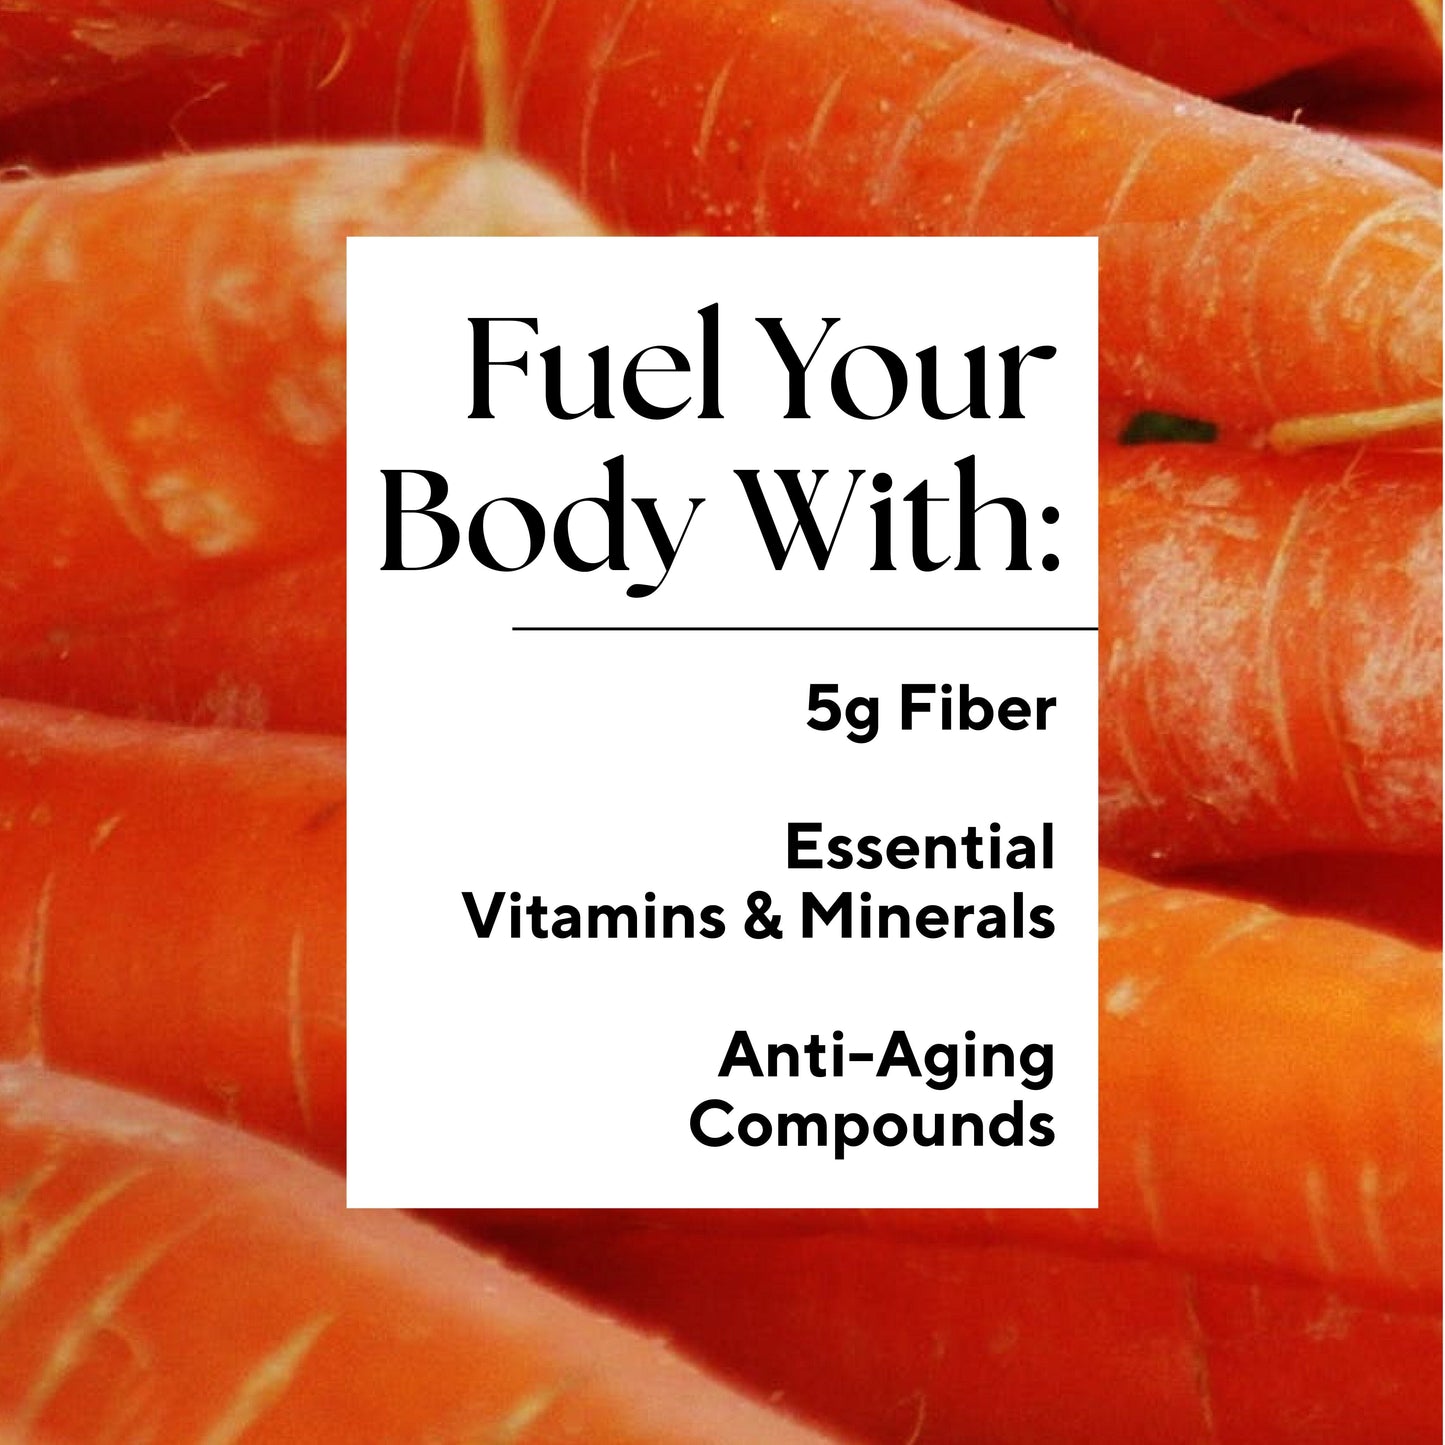 Infographic that reads: "Fuel your body with: 5g Fiber, Essential Vitamins & Minerals, and Anti-Aging Compounds."